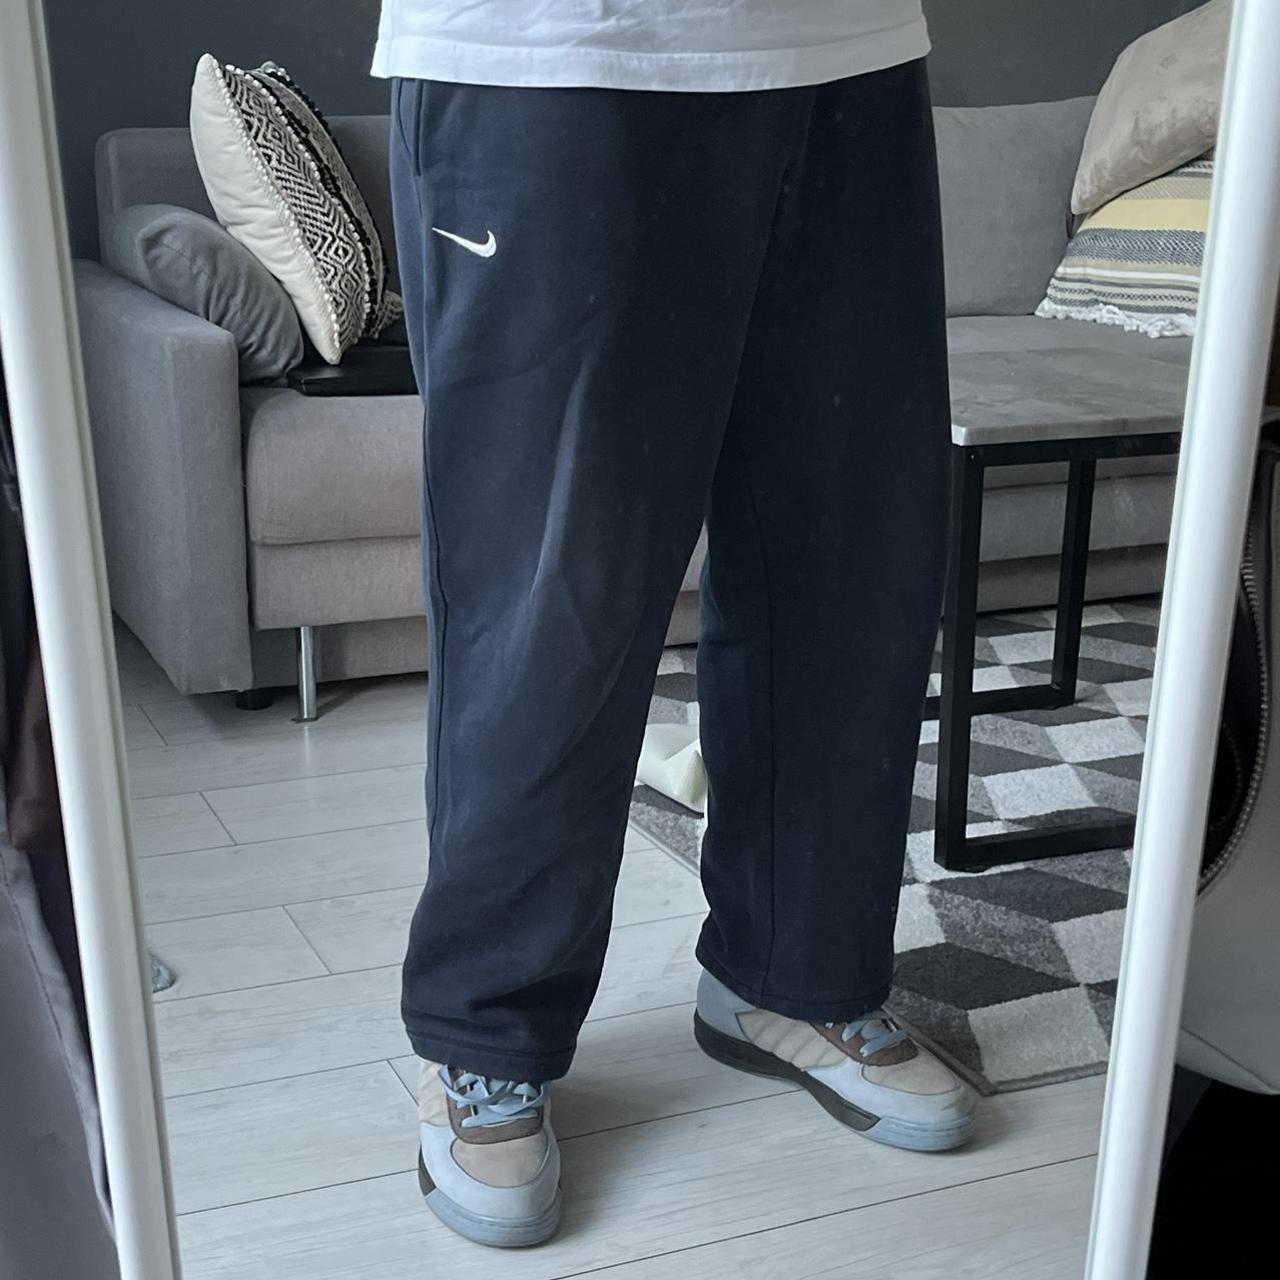 Nike Vintage Nike Tracking Jogger Baggy Pants Trousers, Grailed